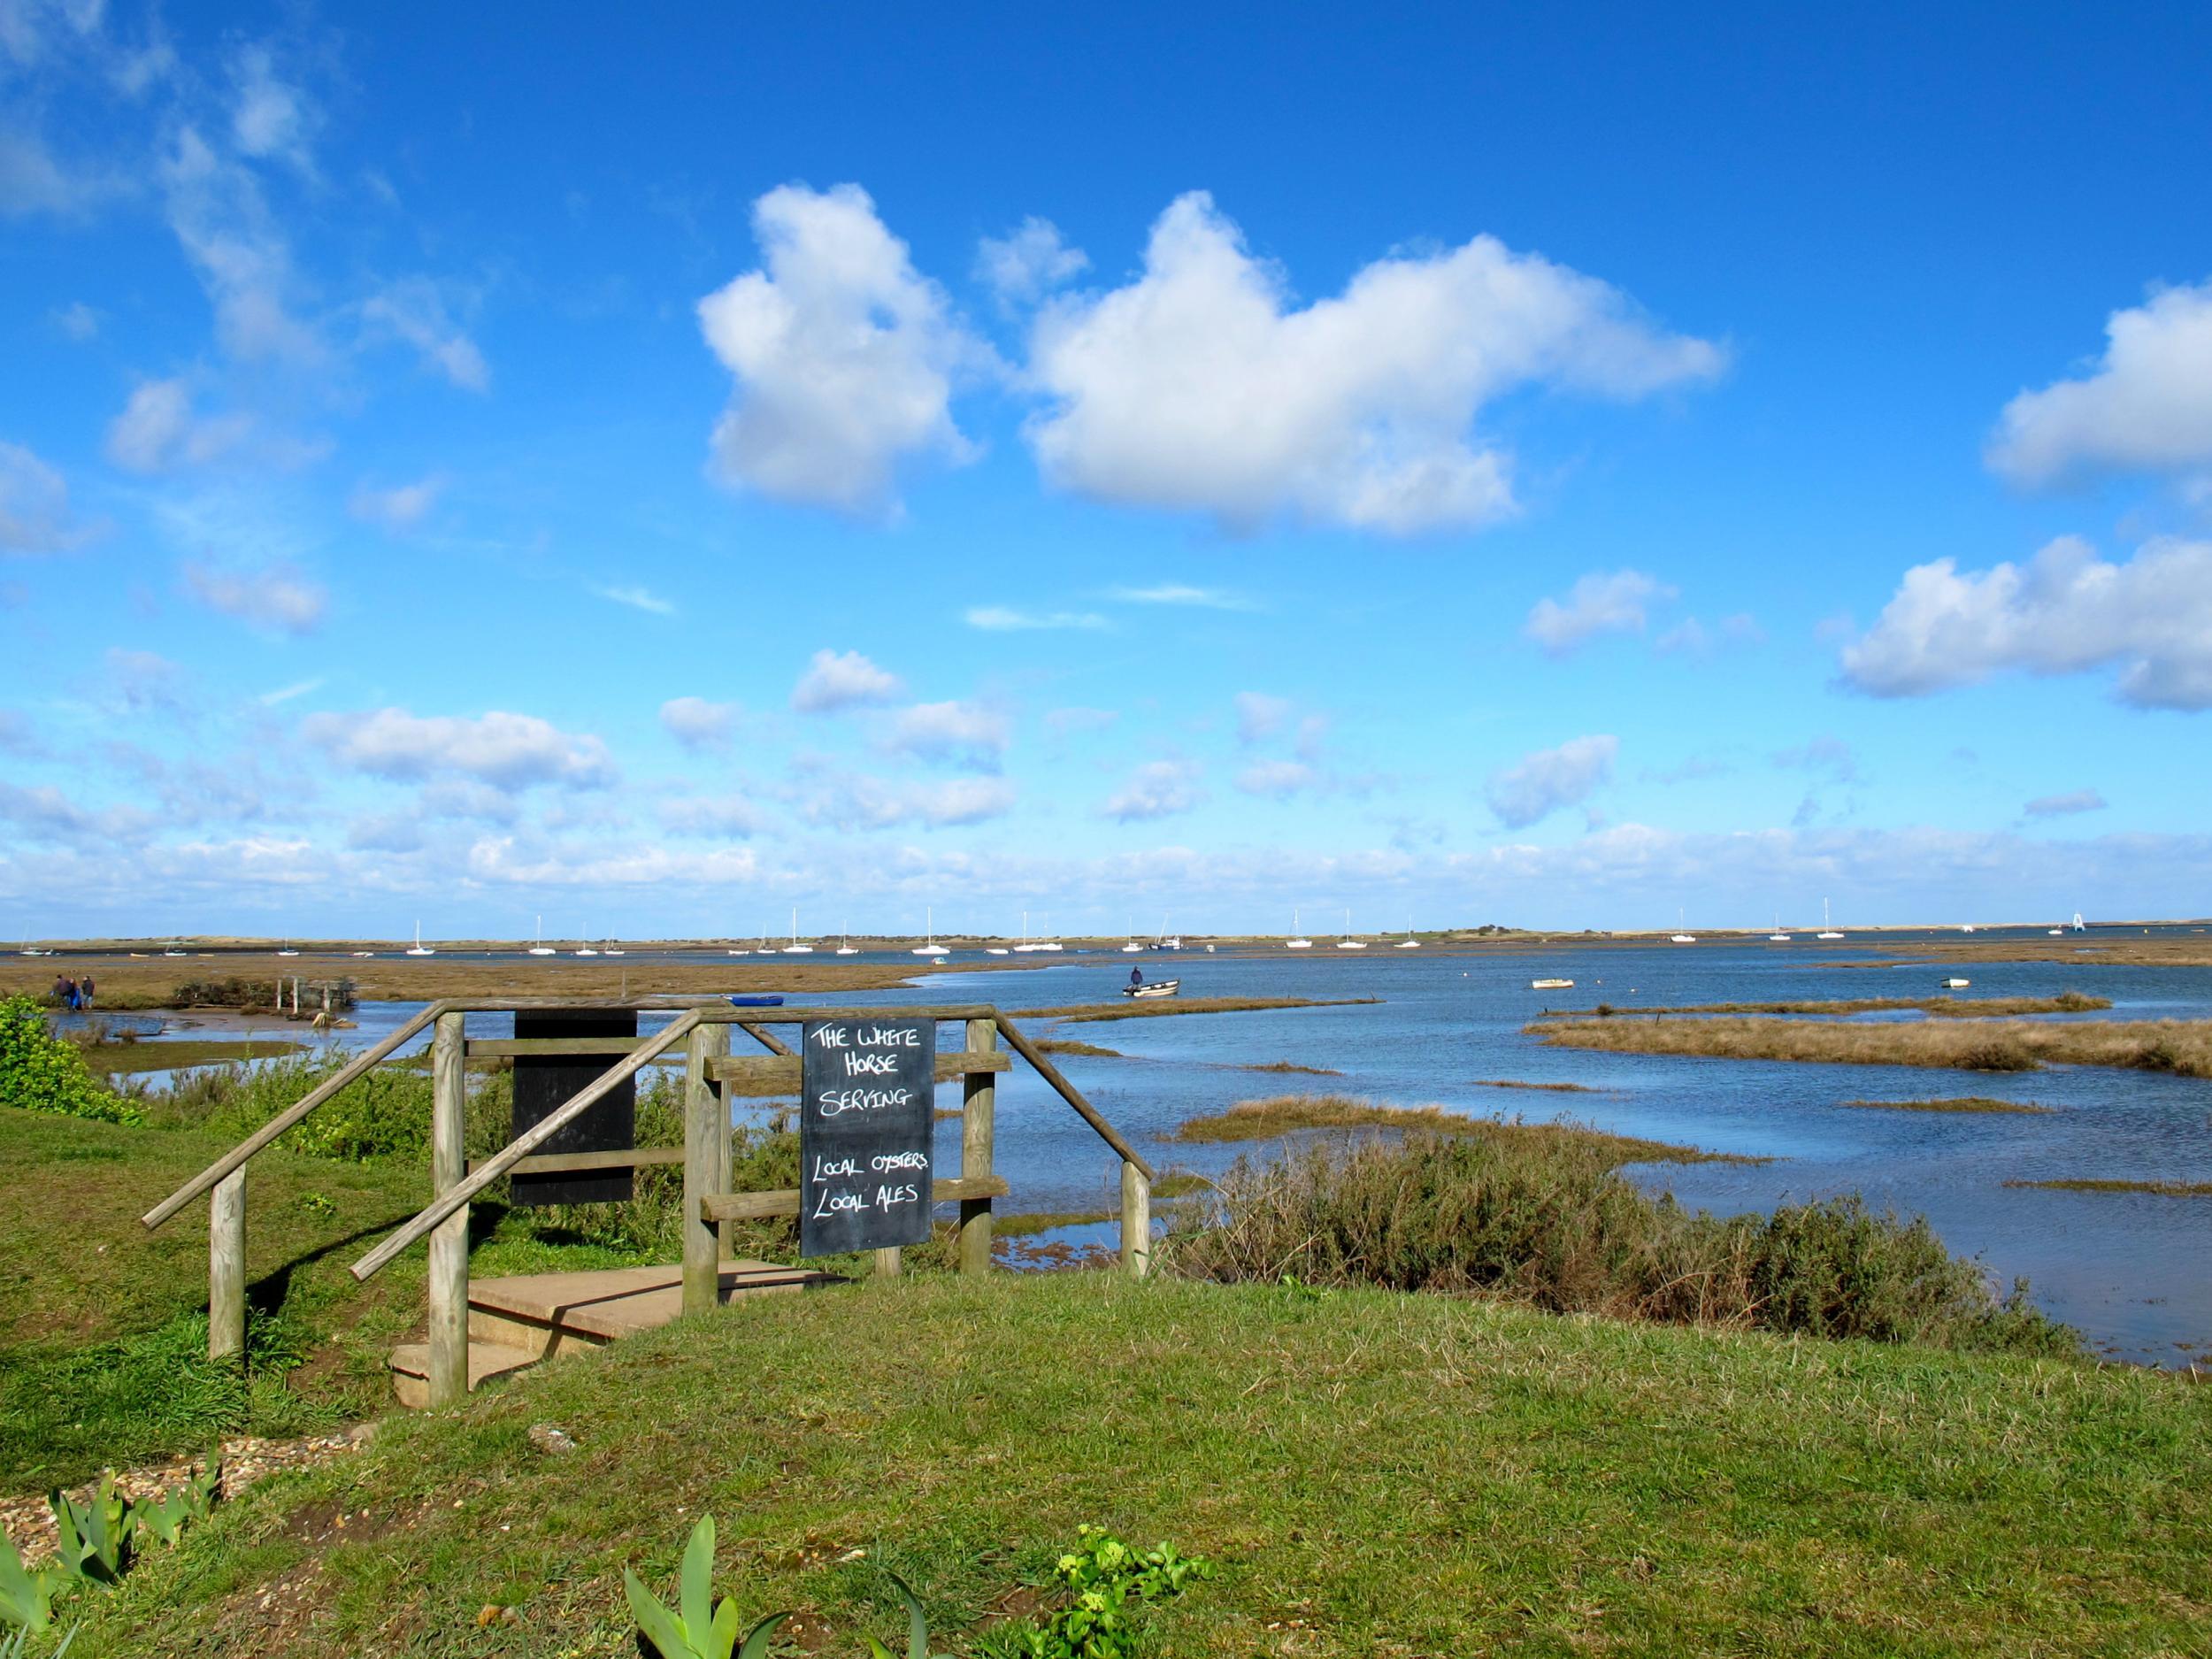 The Nye family’s friendly inn is perfectly placed for views of the salt marsh